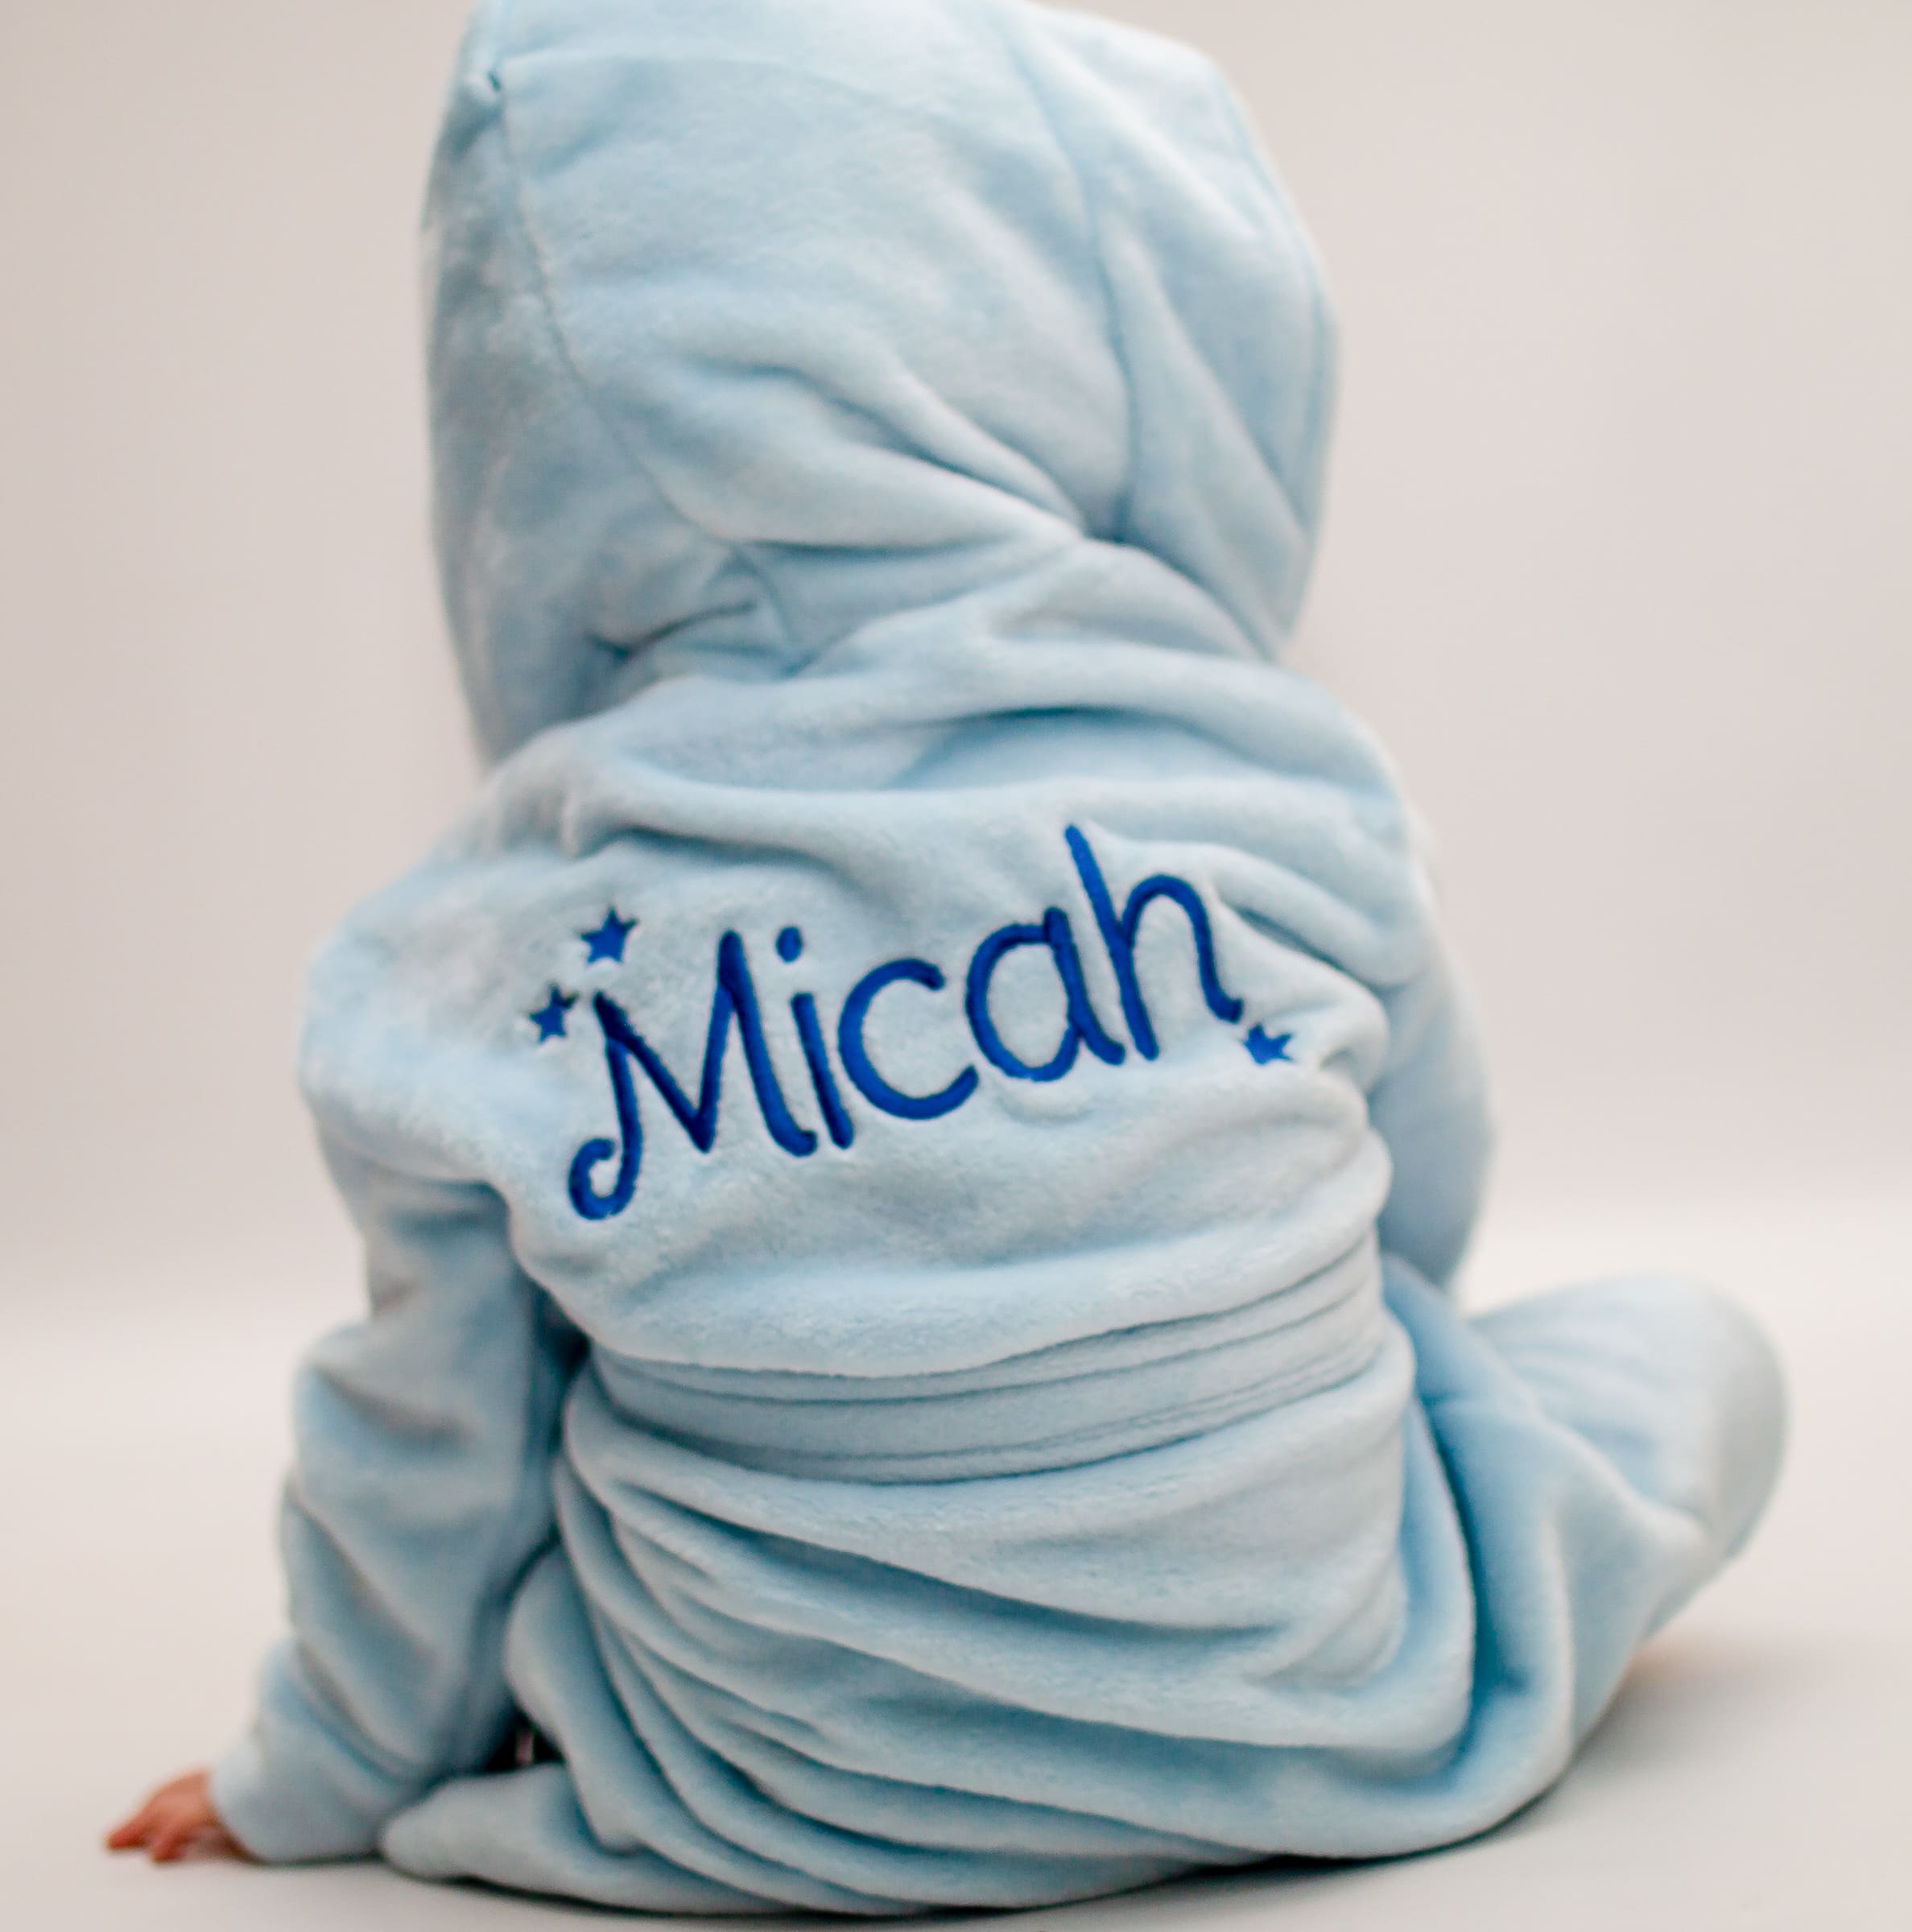 personalized baby dressing gown